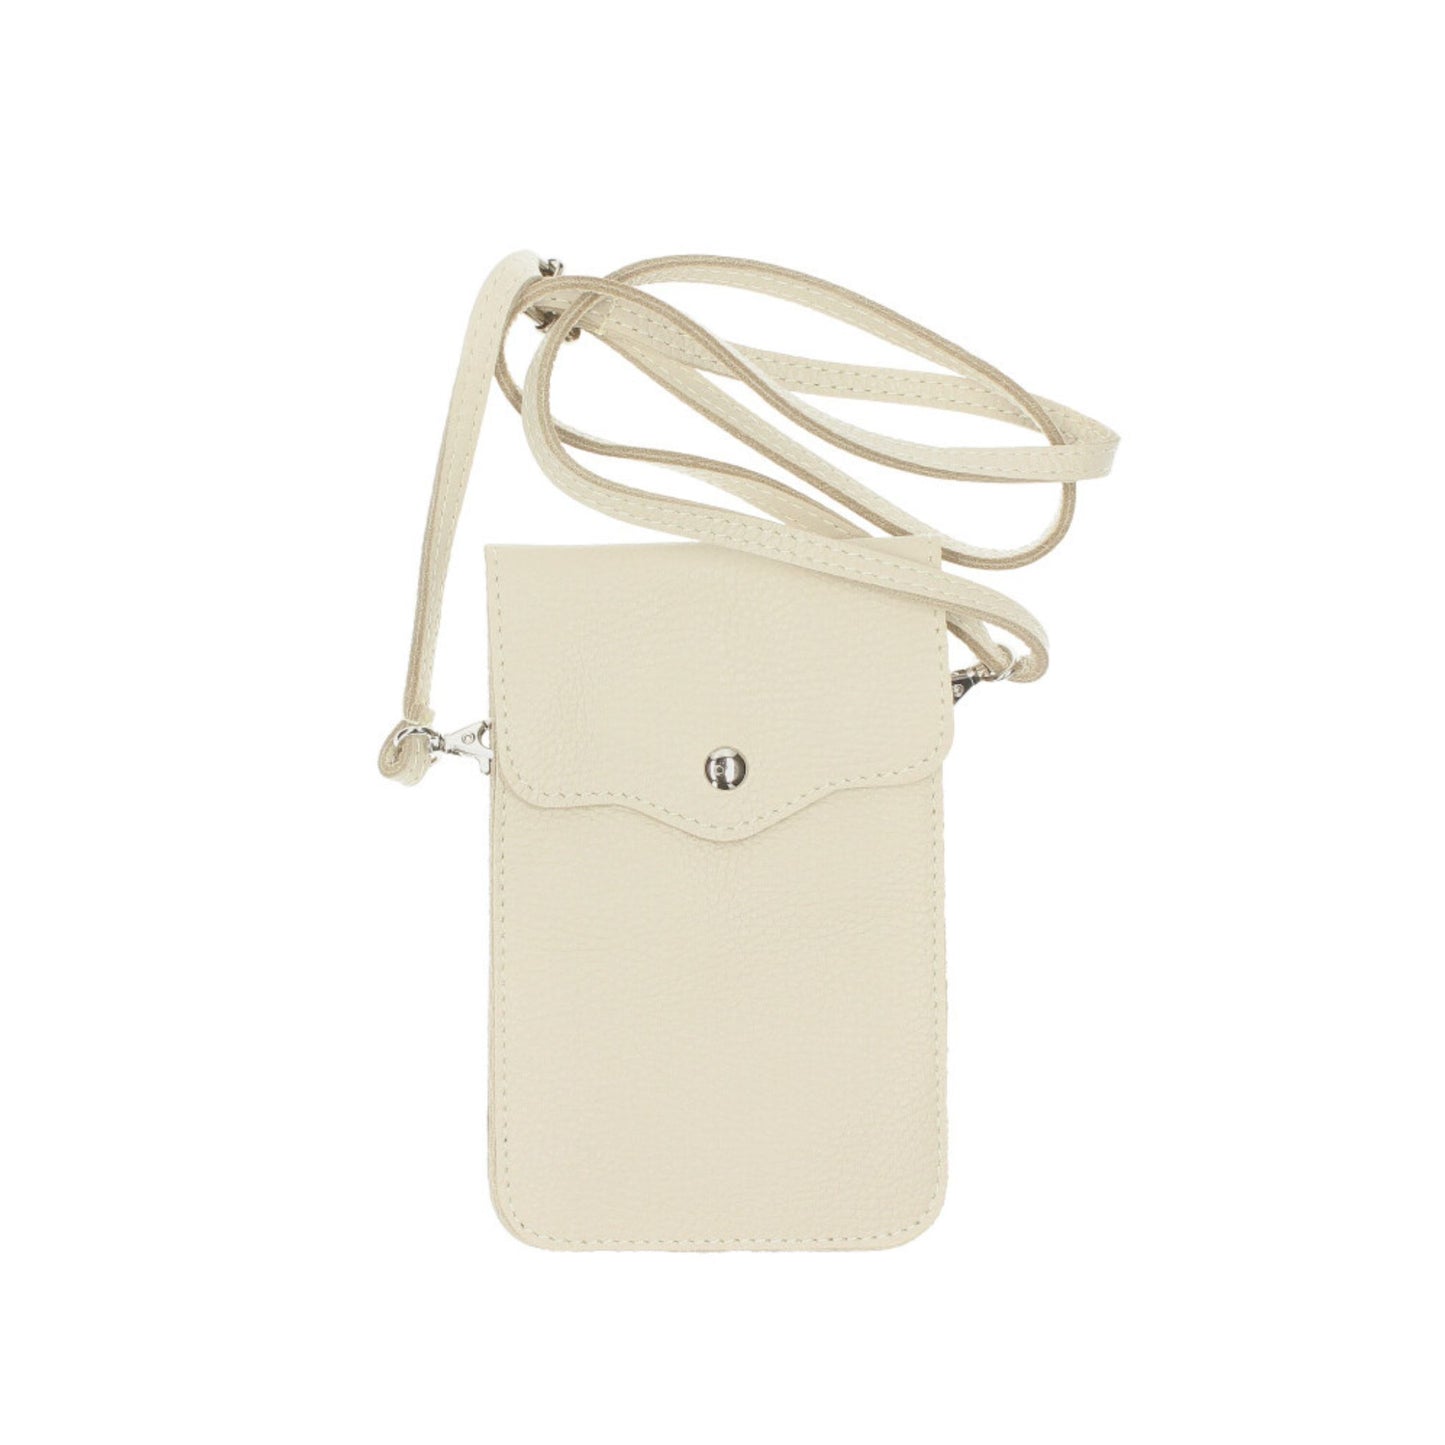 The Leather Cross Body Mobile Phone Bag